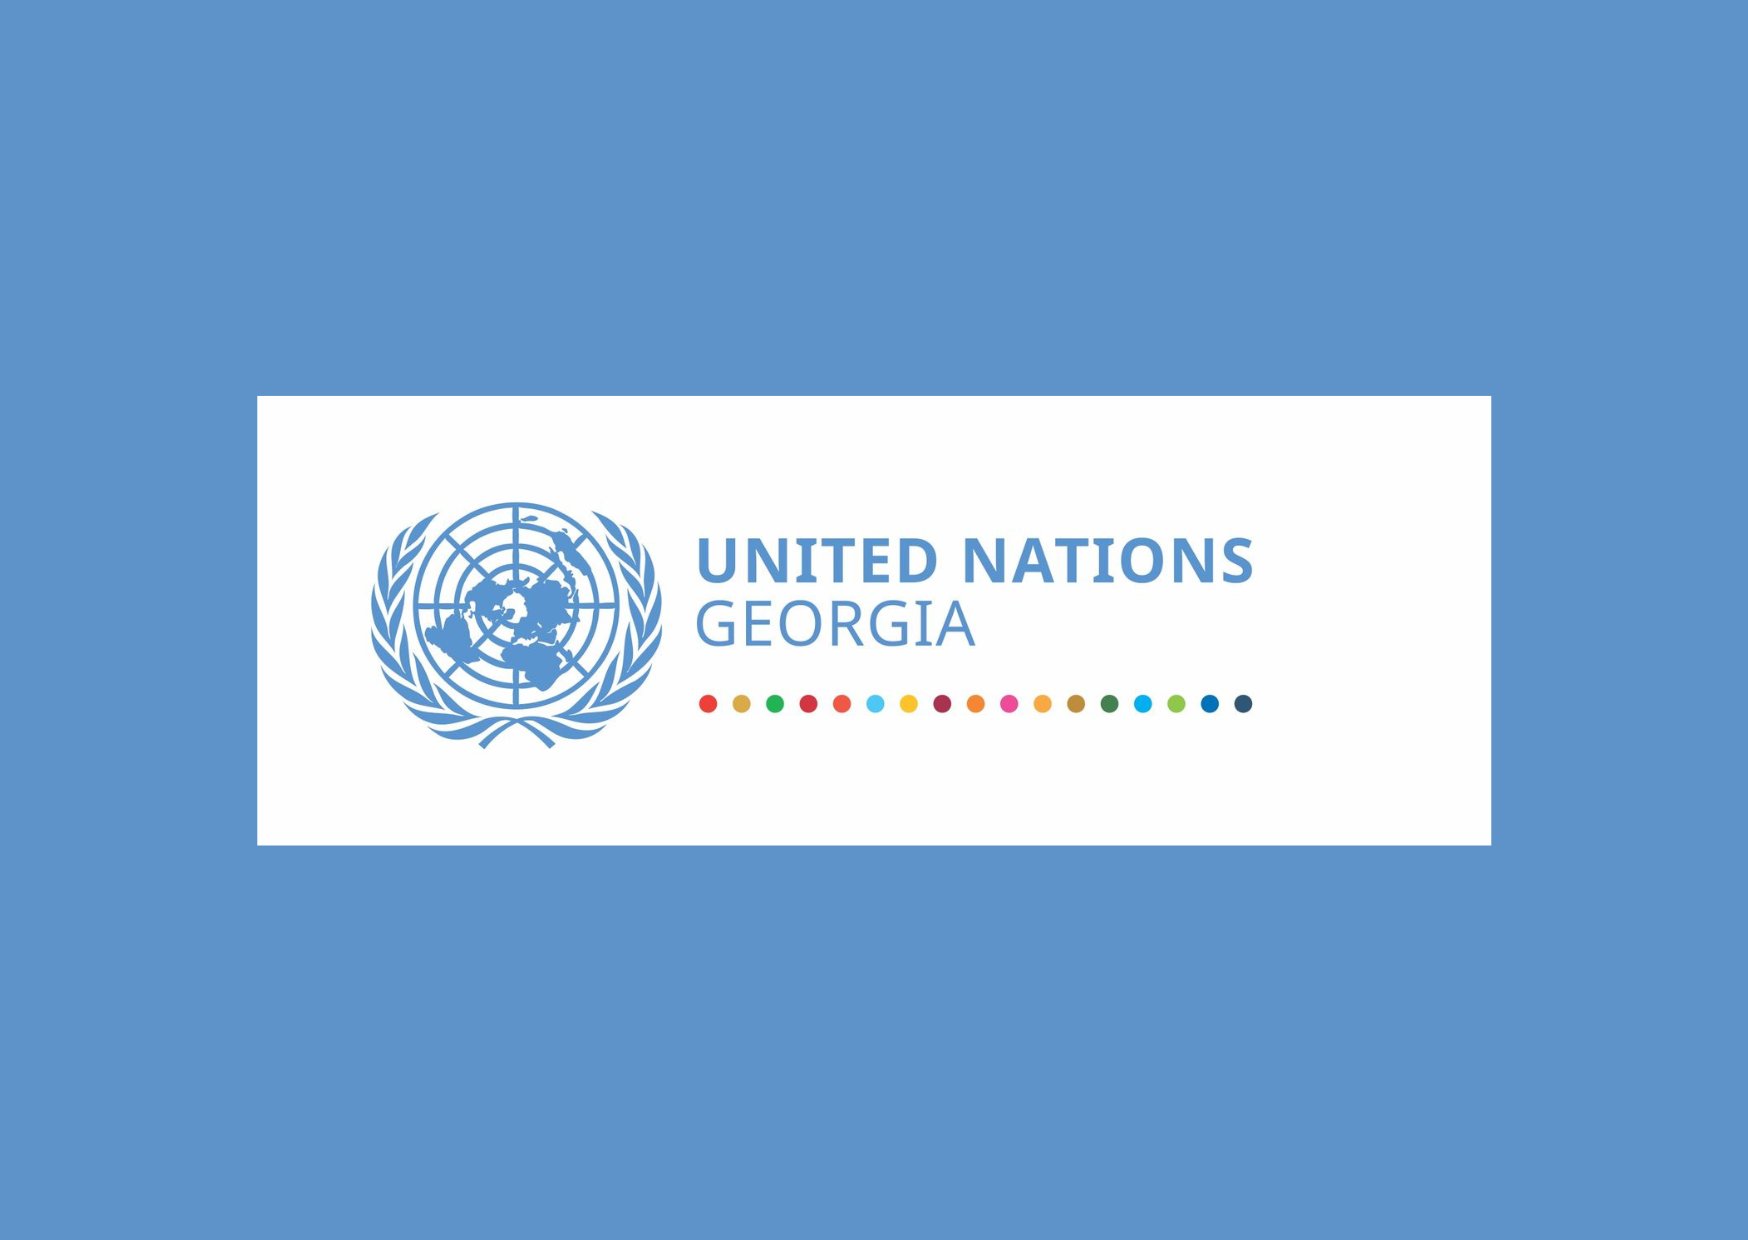 Statement of the United Nations in Georgia